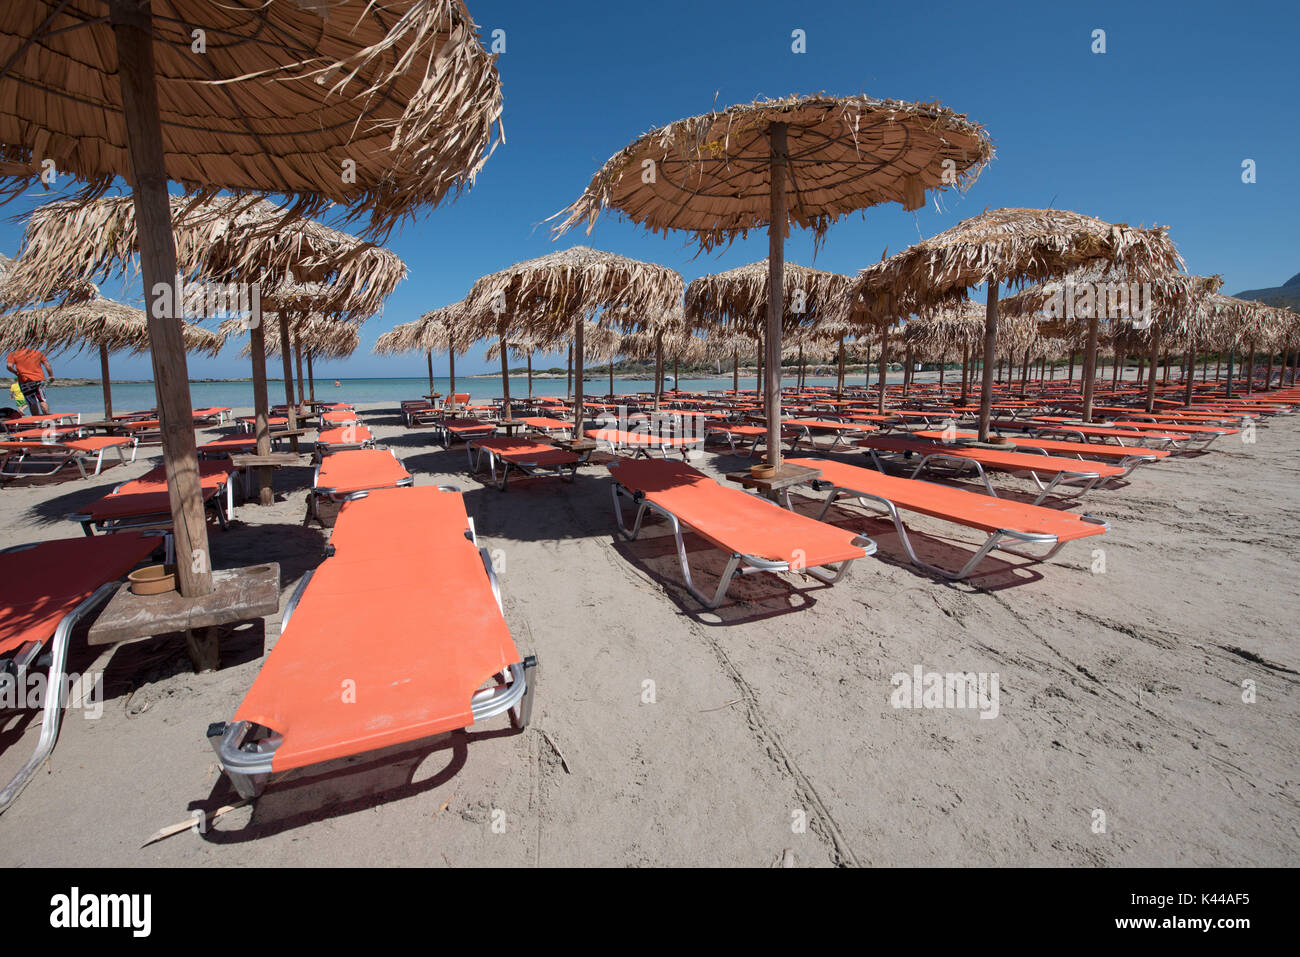 Elafonissi beach, Crete, Greece, Europe. One of the most european famous beach, in this part thare are ombrella for shade and sun beds. Stock Photo